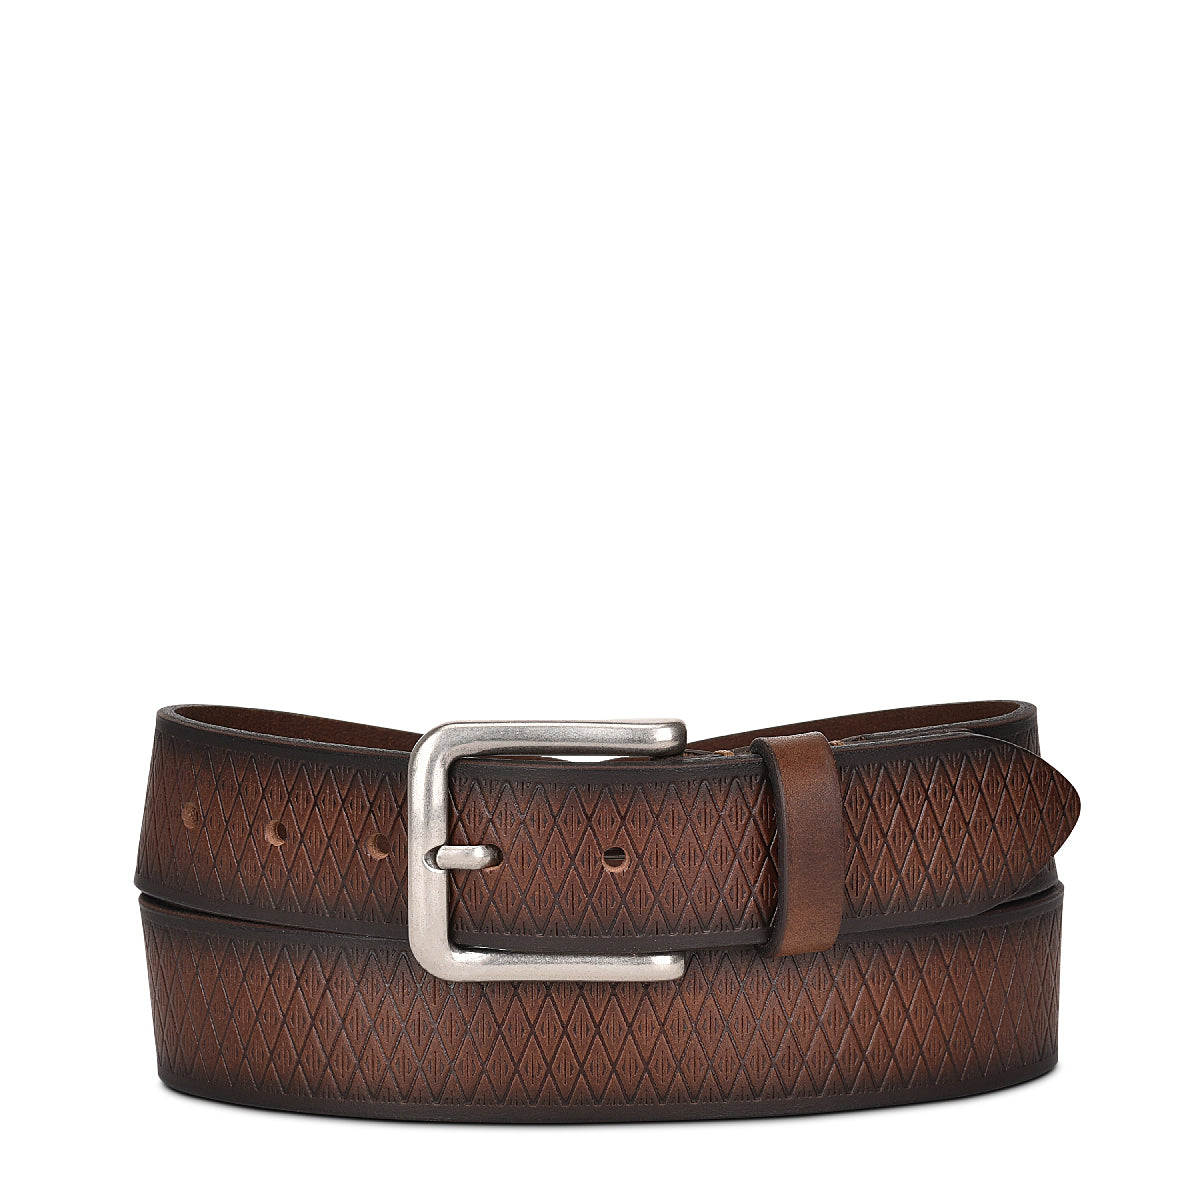 Geometrical engraved casual brown leather belt 1.5